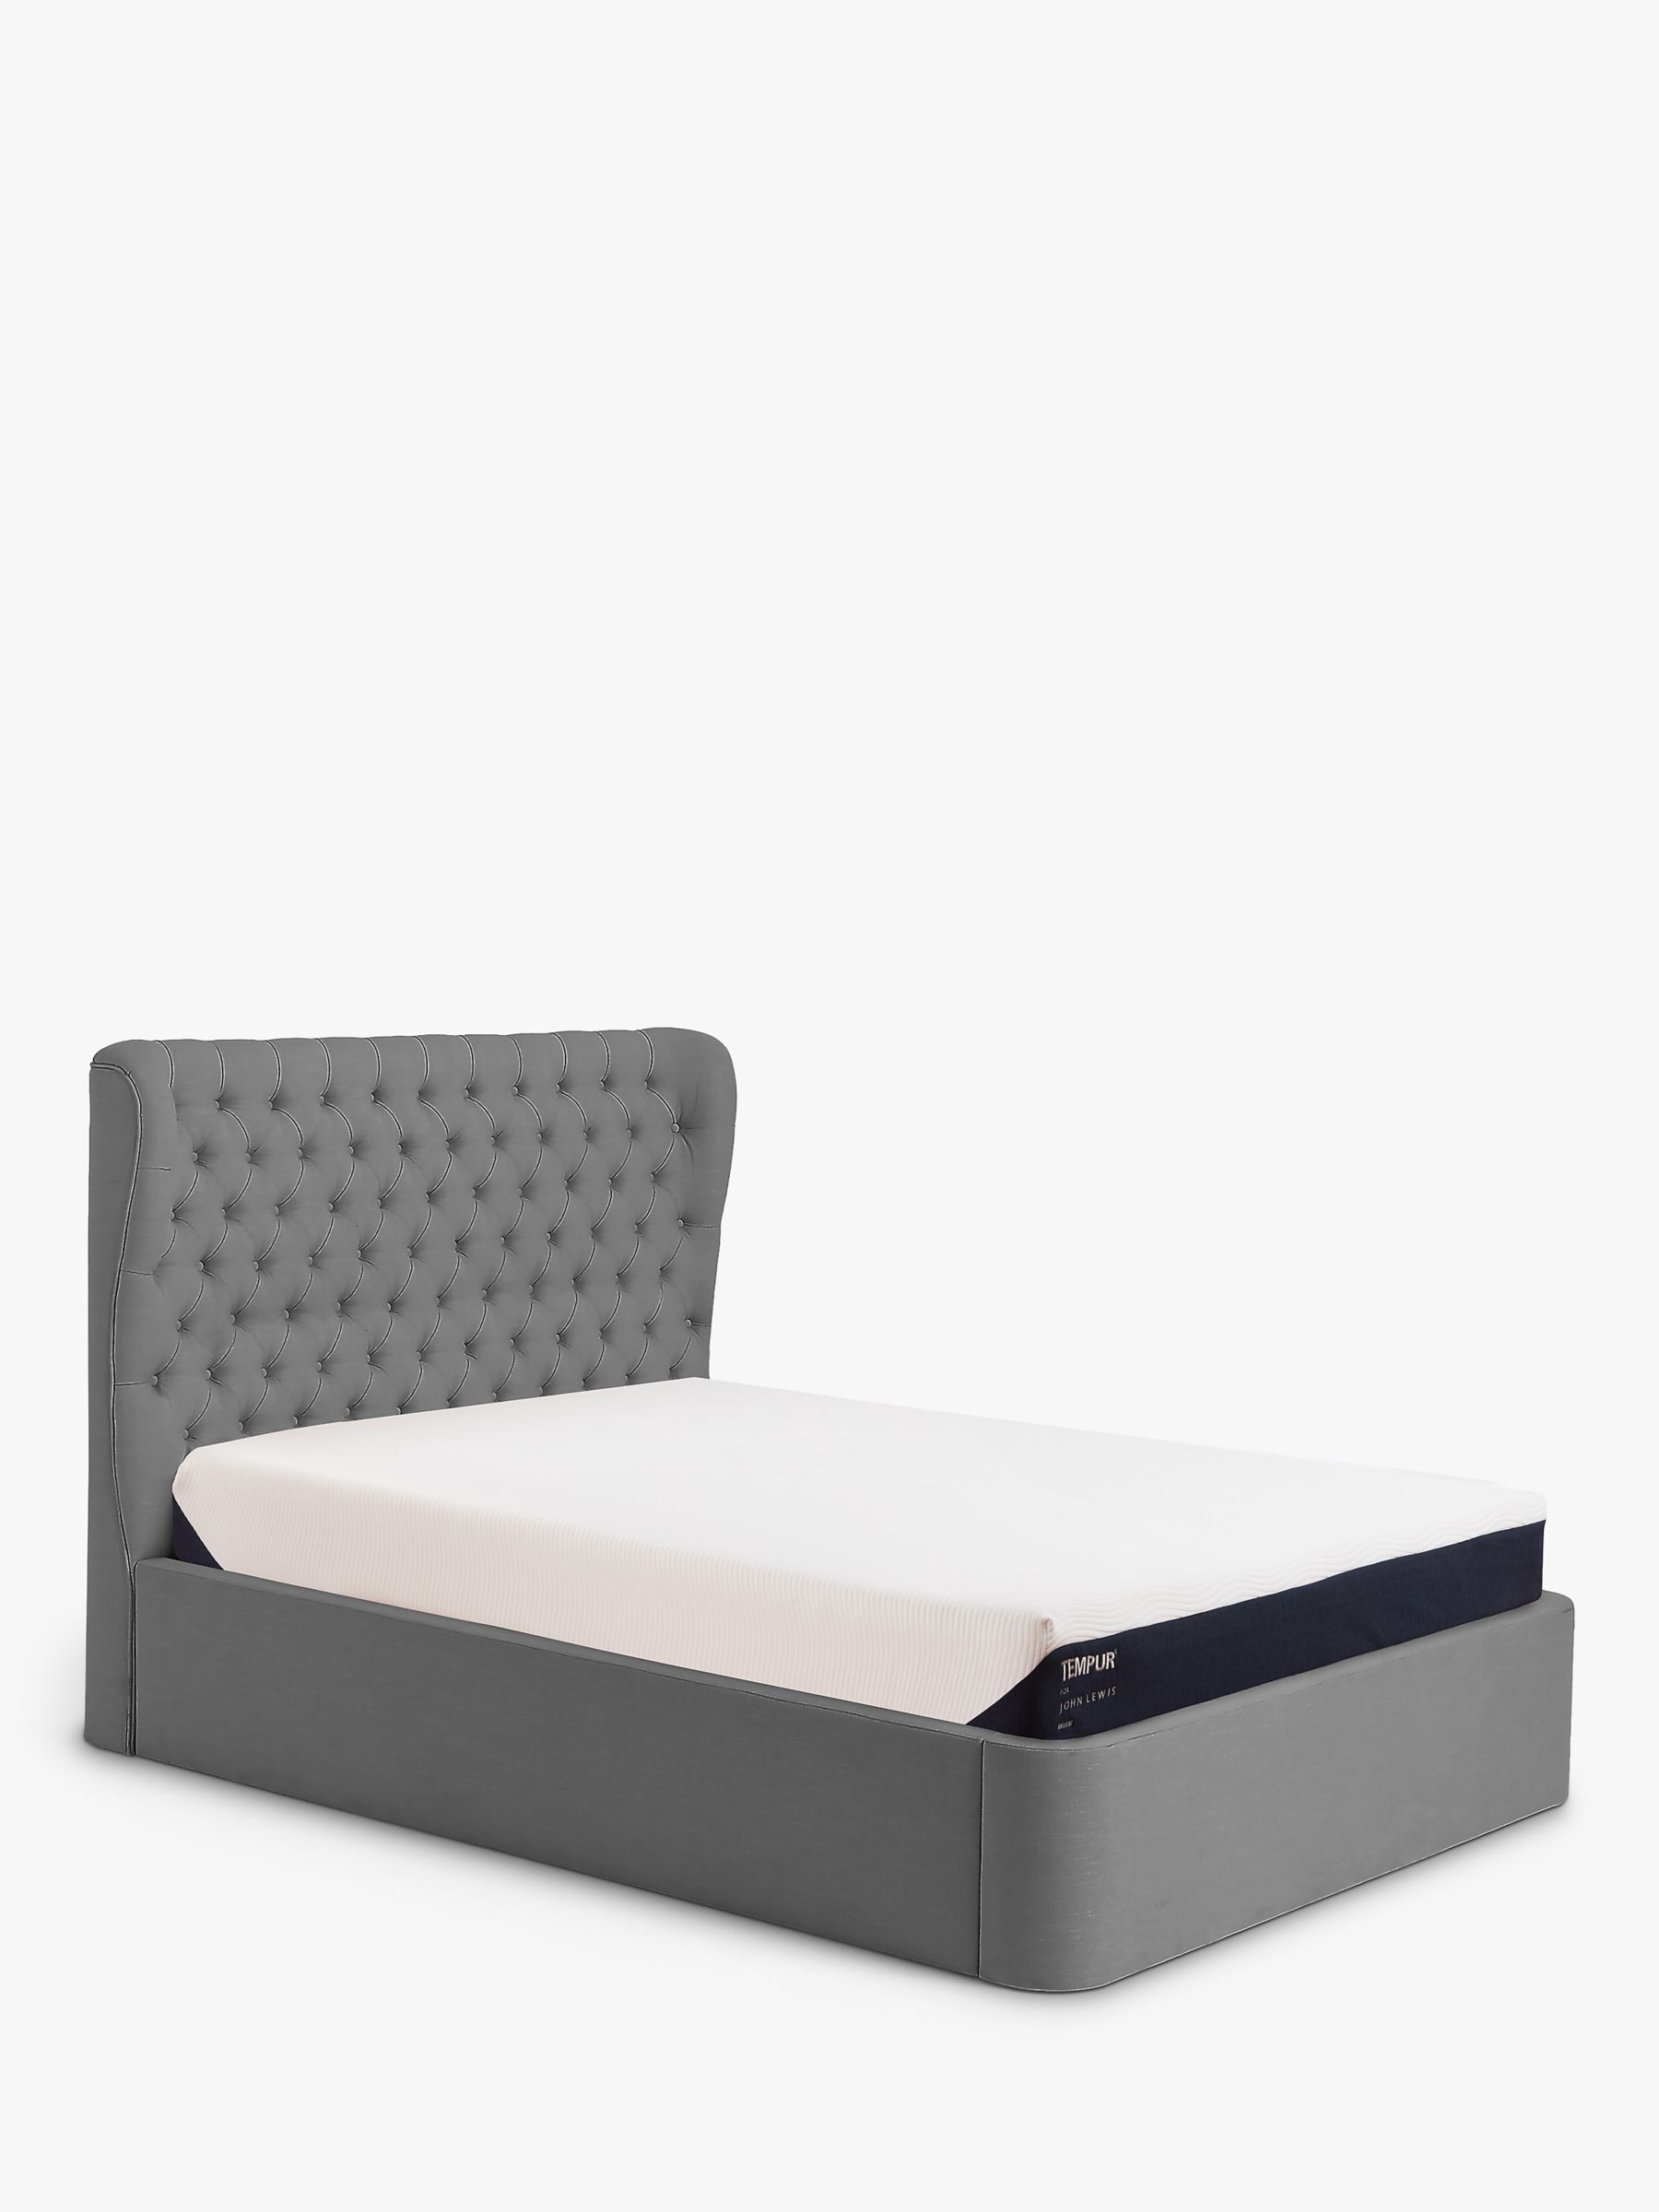 Photo of Tempur® button ottoman storage upholstered bed frame king size